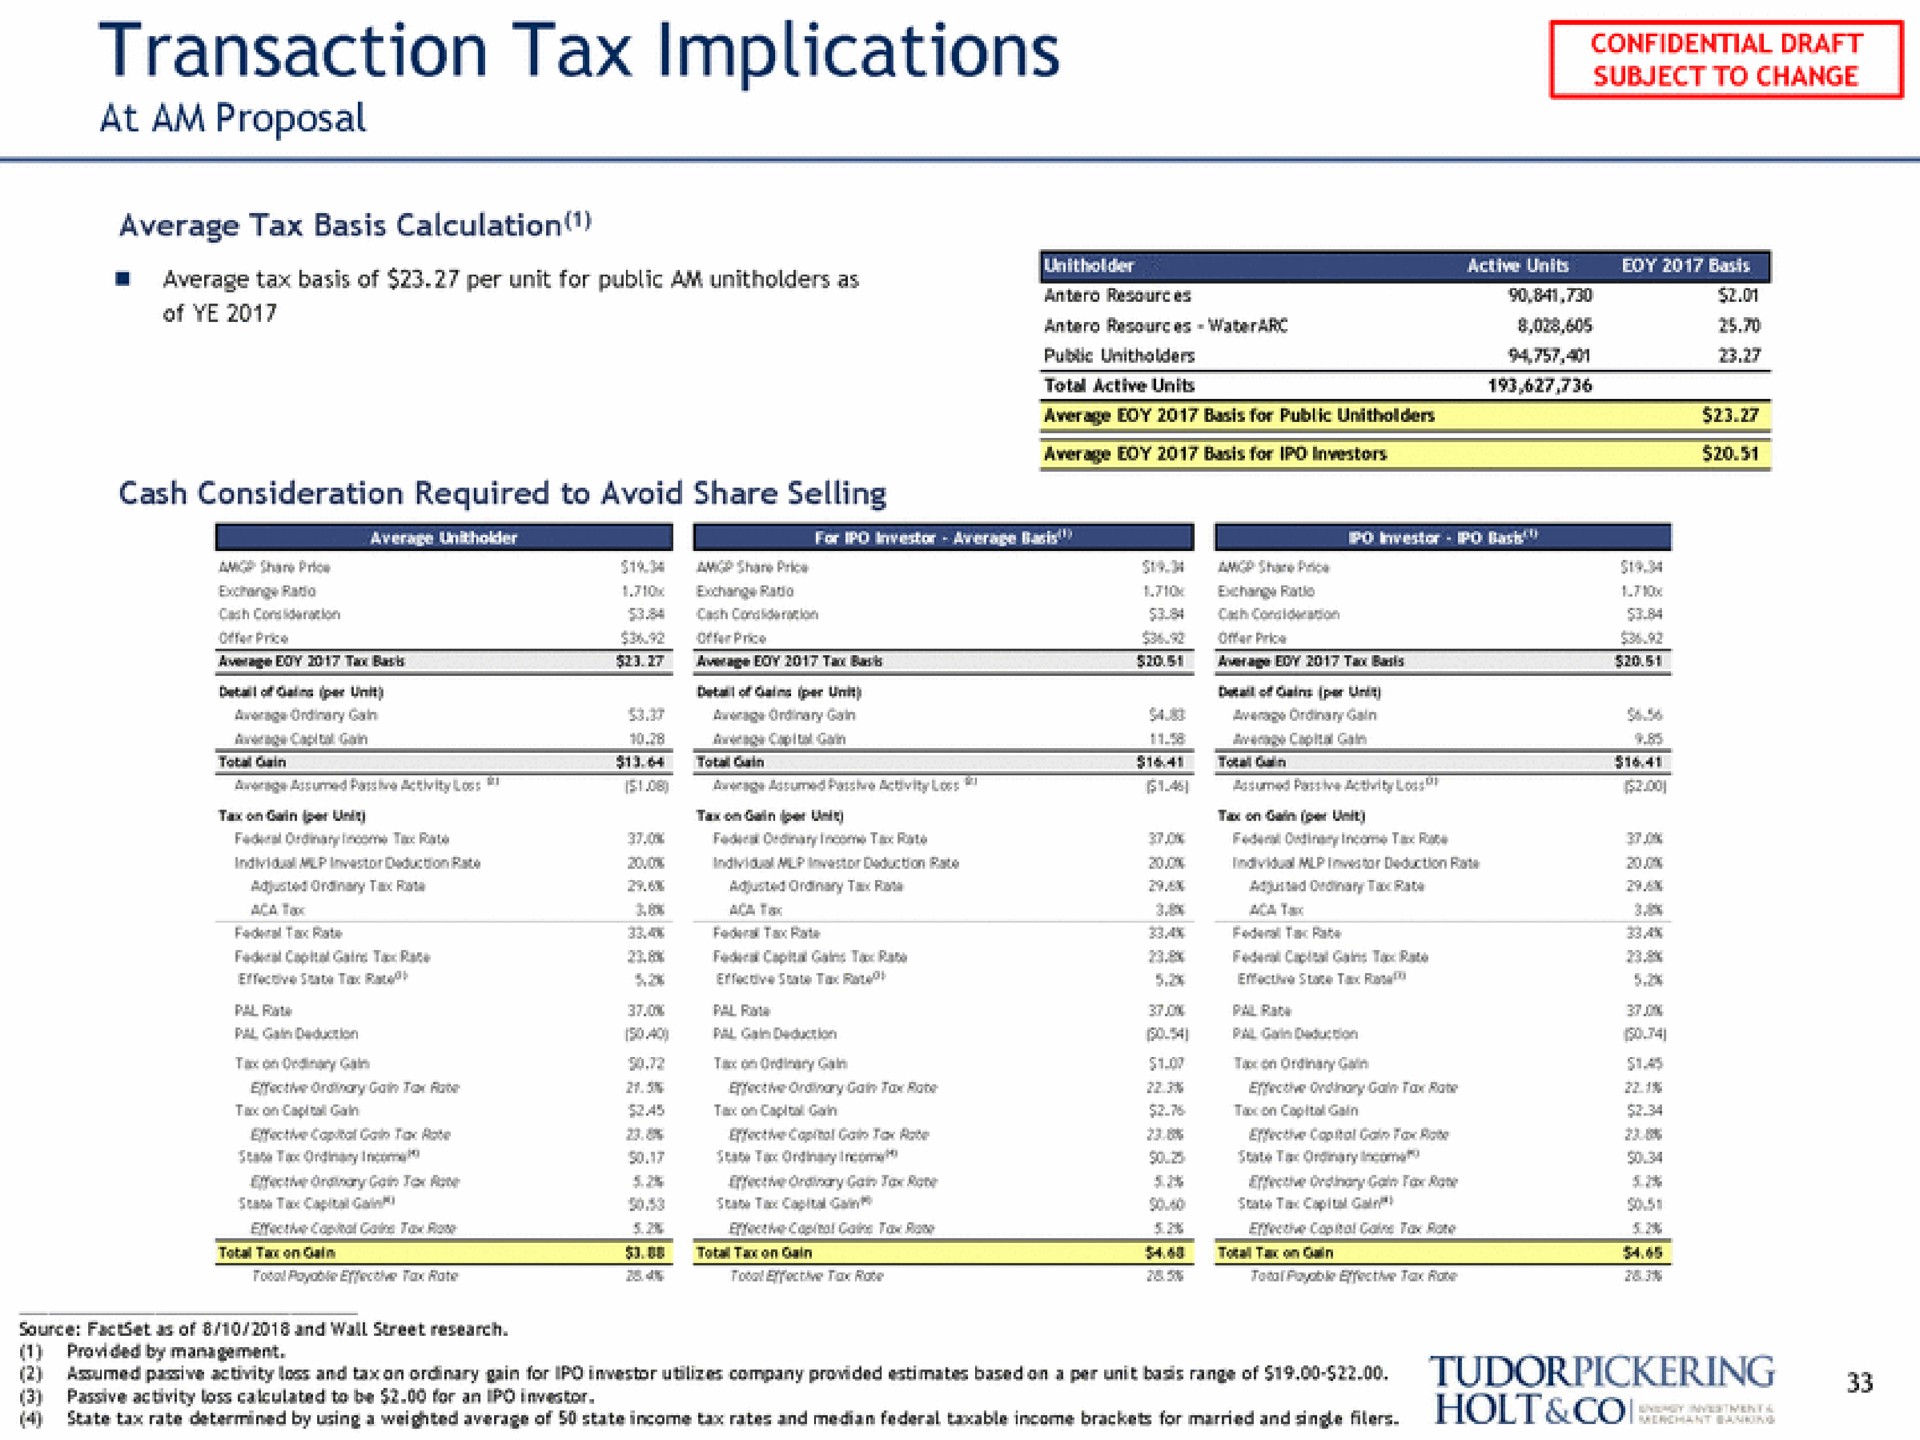 transaction tax implications at am proposal subject to change | Tudor, Pickering, Holt & Co